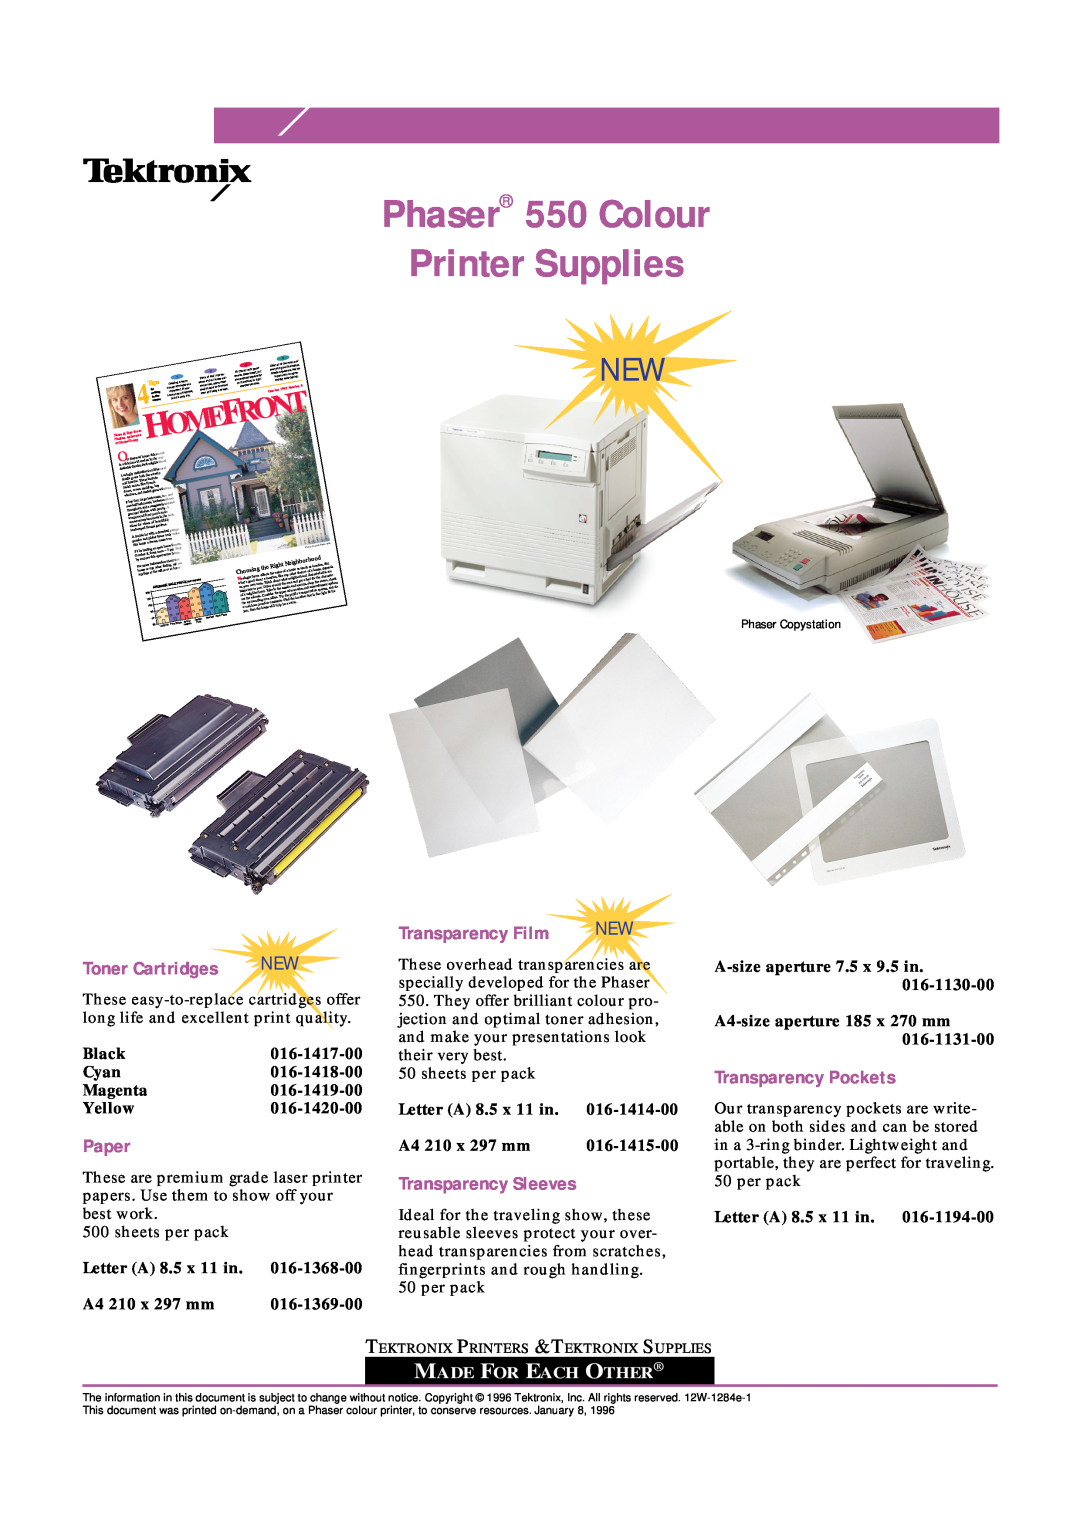 Xerox 016-1368-00 manual Phaser 550 Colour Printer Supplies, Ront, Toner Cartridges NEW, Paper, Transparency Film 